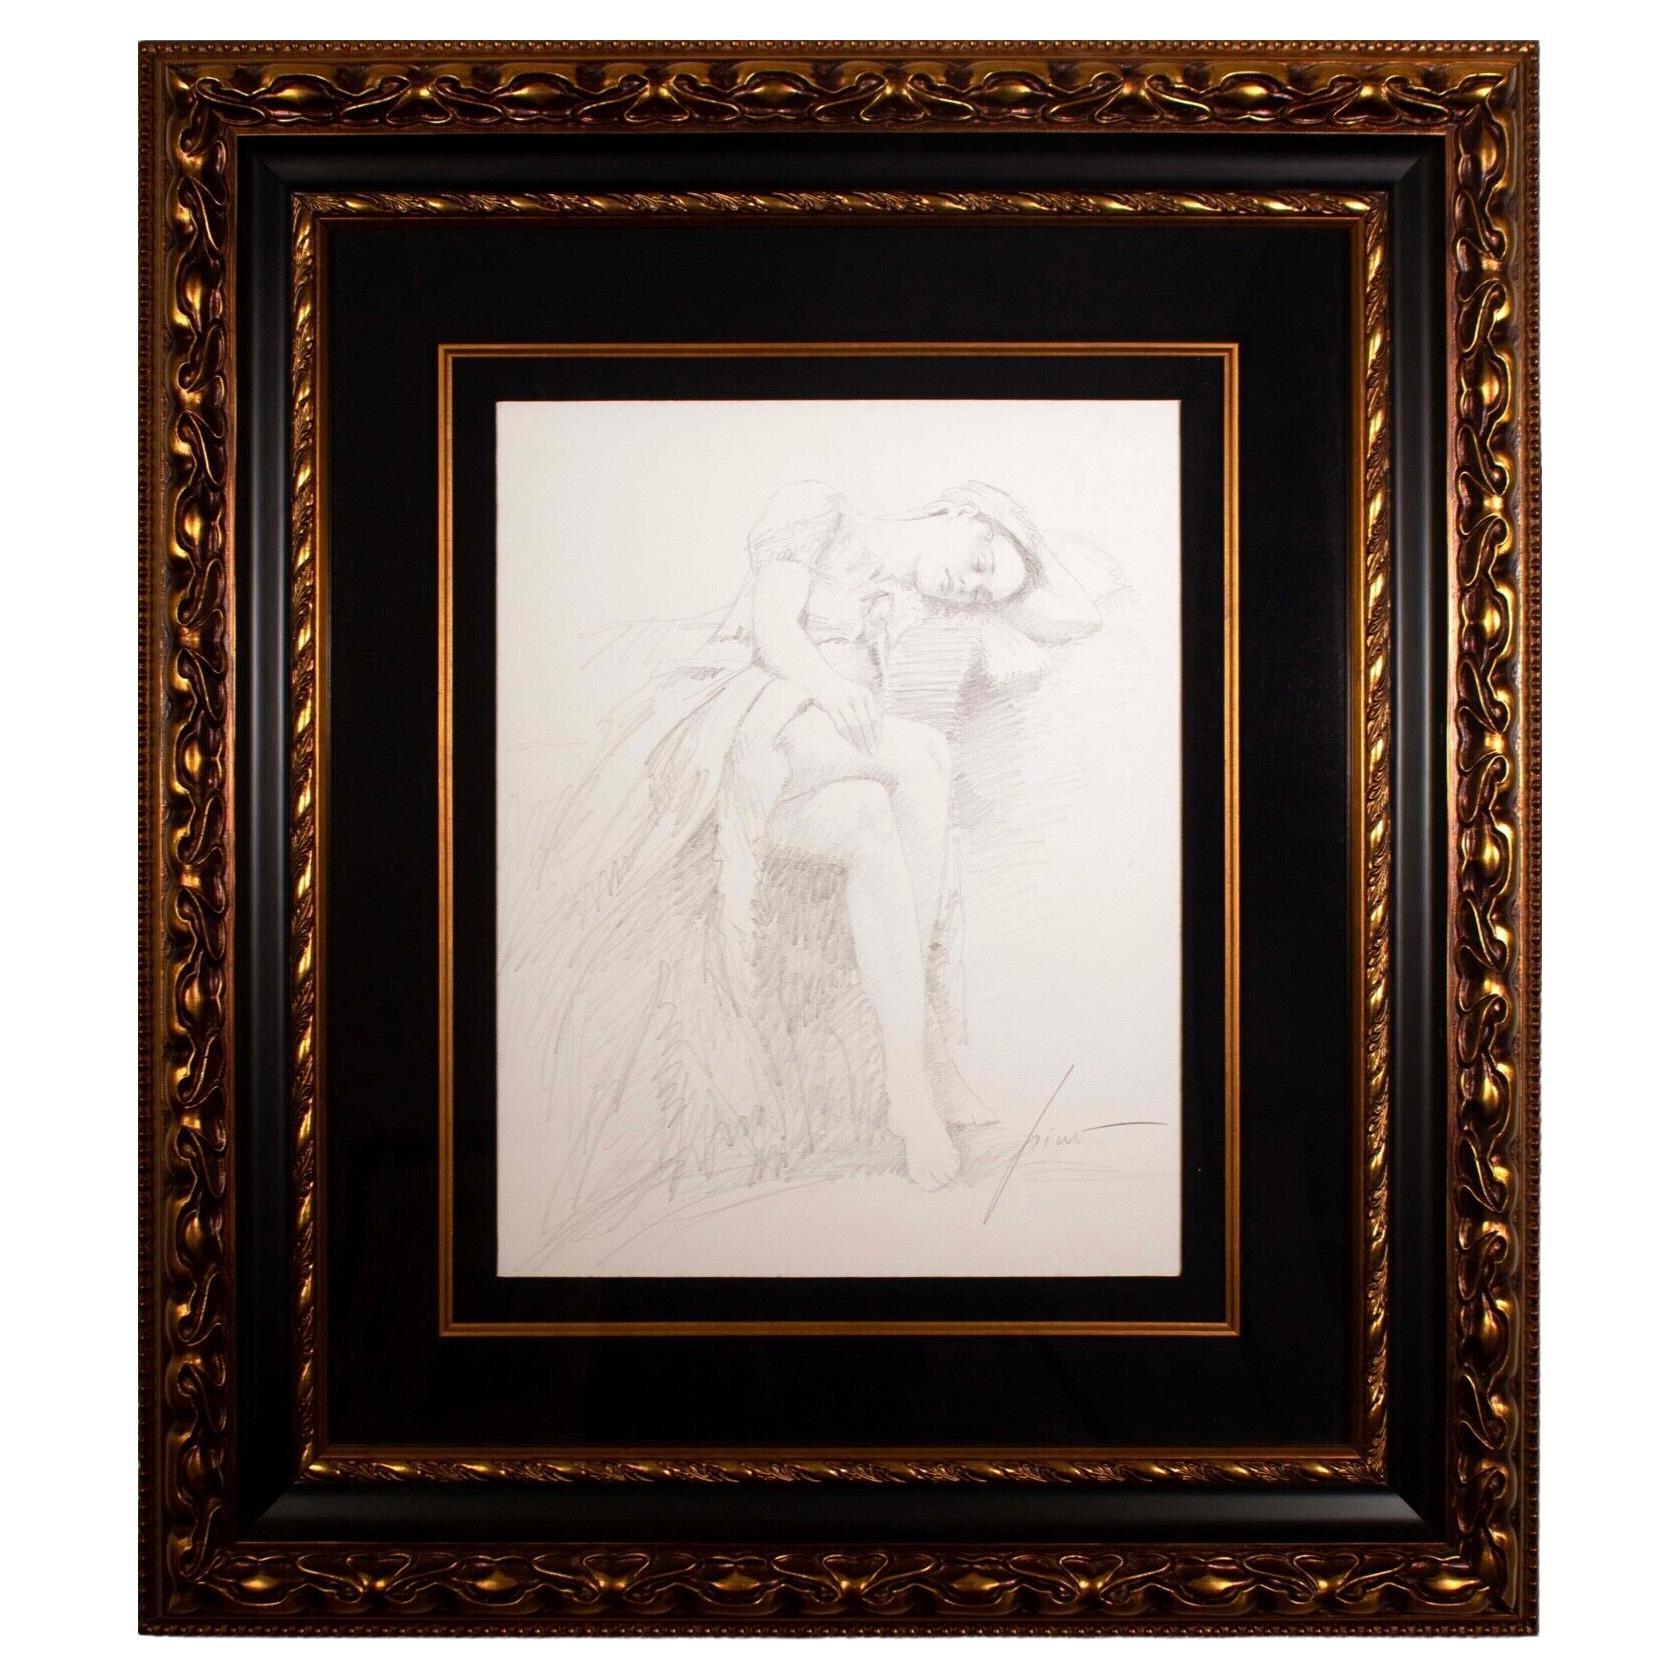 Pino Signed Original Graphite Drawing on Paper Untitled #246 Encadré 2009 w/ COA